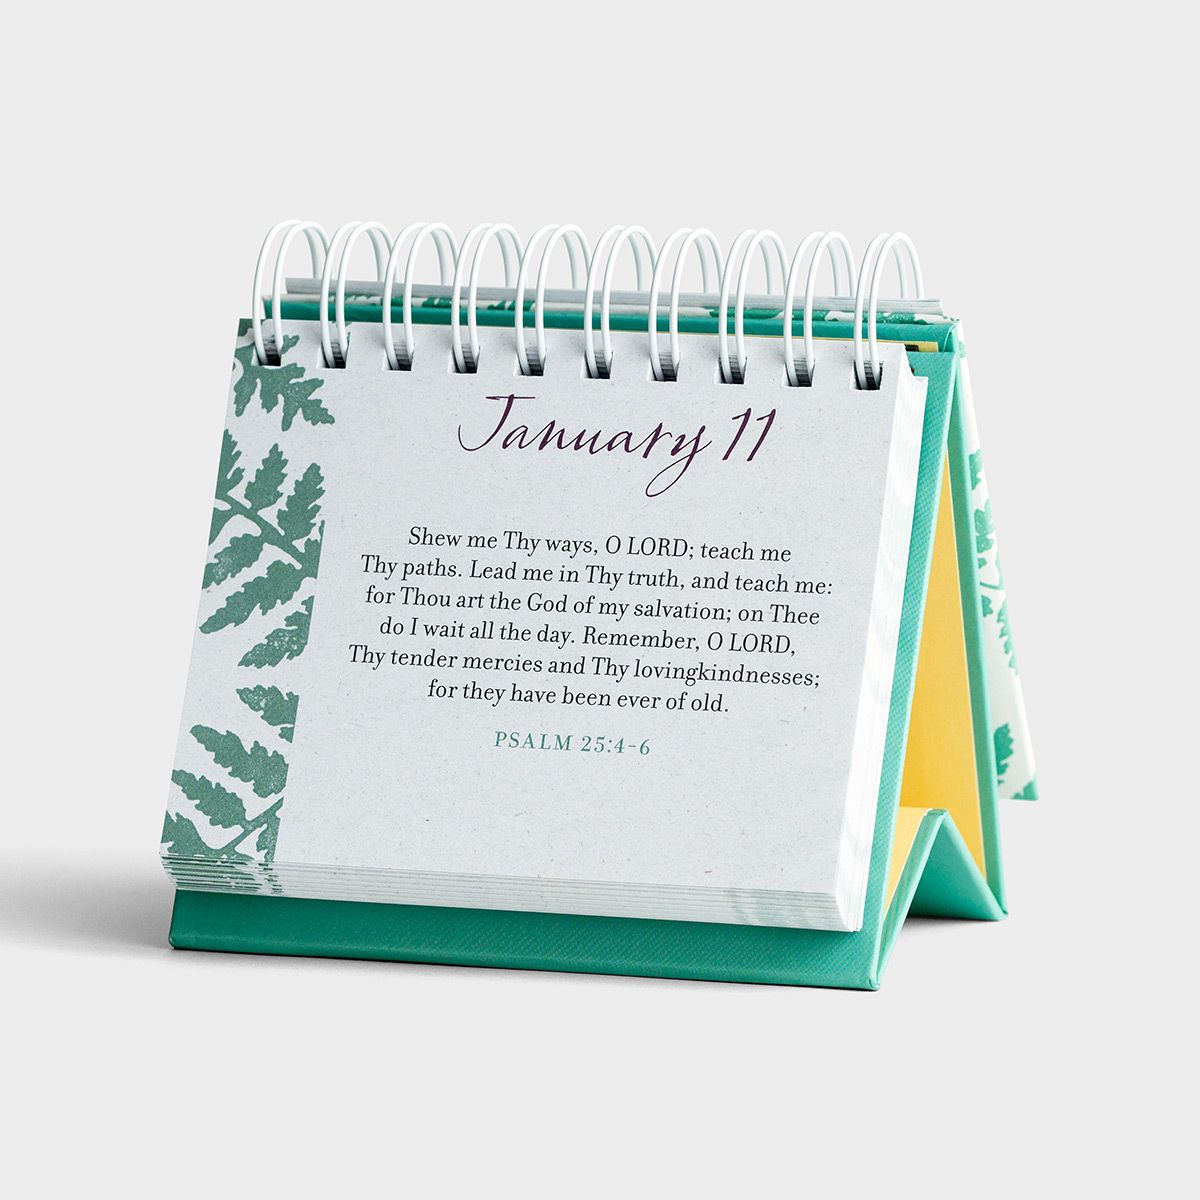 Promises and Blessings - 365 Day Inspirational DayBrightener - The Christian Gift Company